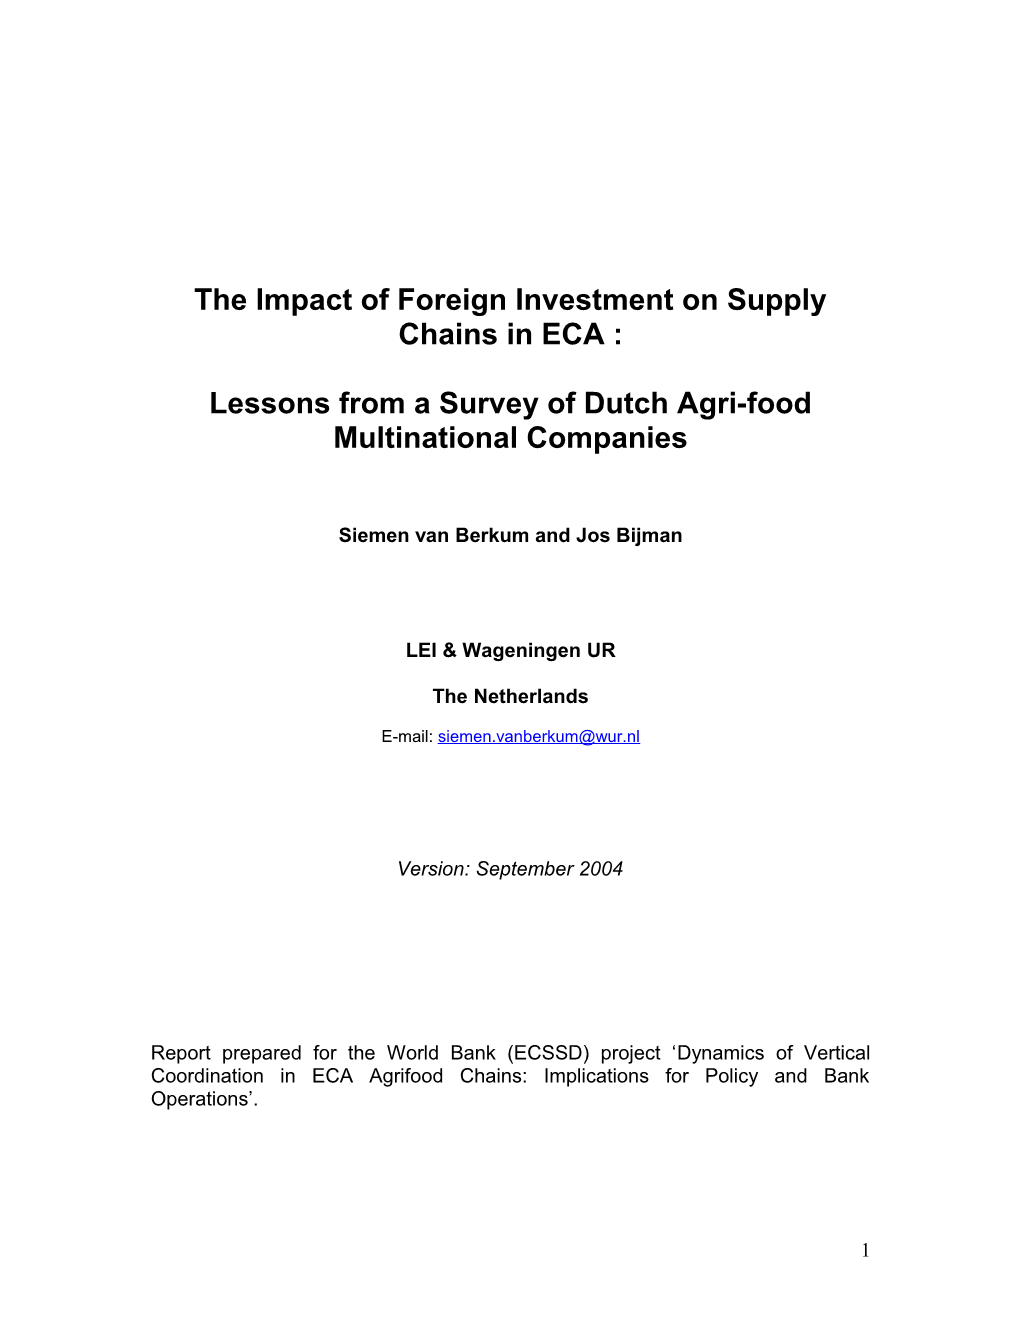 The Impact of Foreign Investment on Supply Chains in ECA